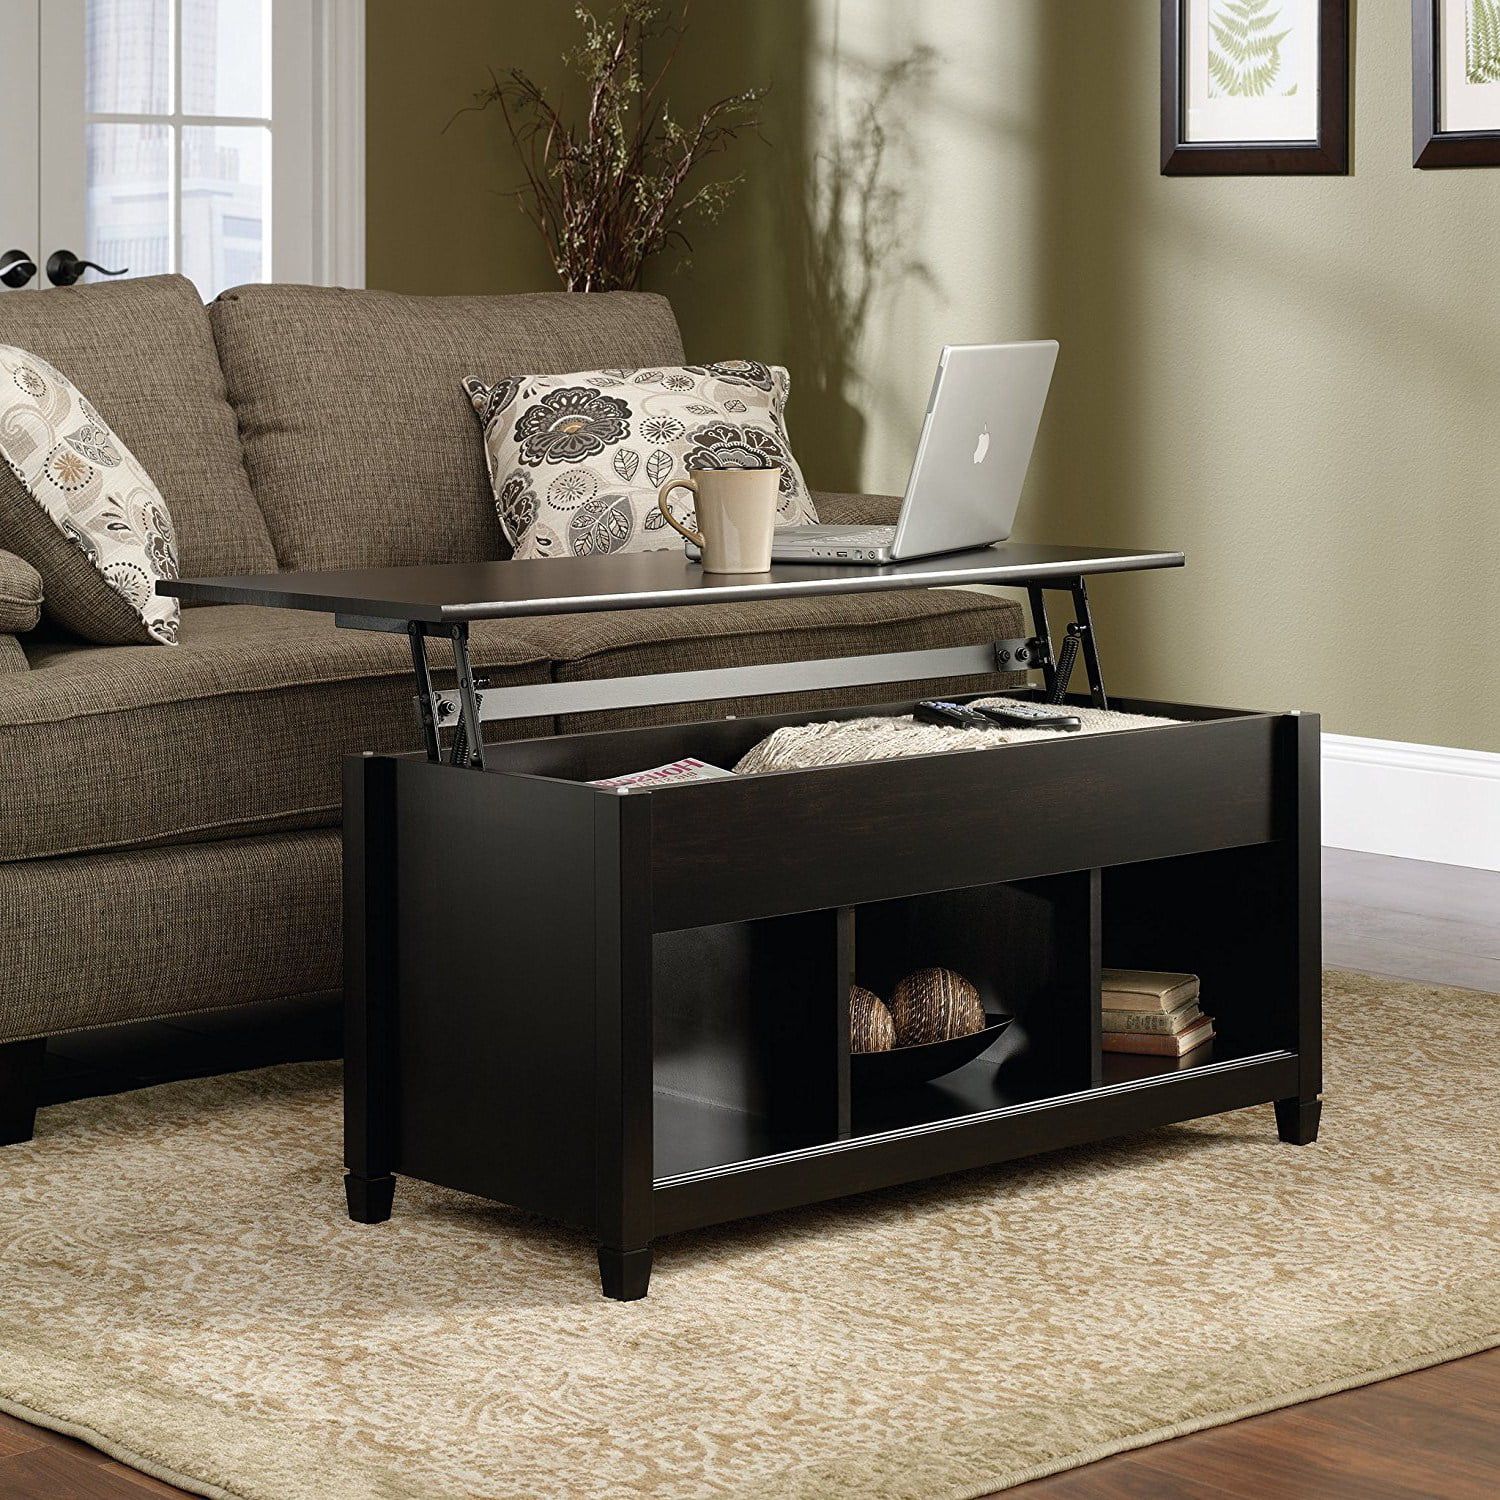 Zimtown Lift Up Top Coffee Table With Hidden Compartment End Rectangle Within Lift Top Coffee Tables With Storage (Gallery 3 of 20)